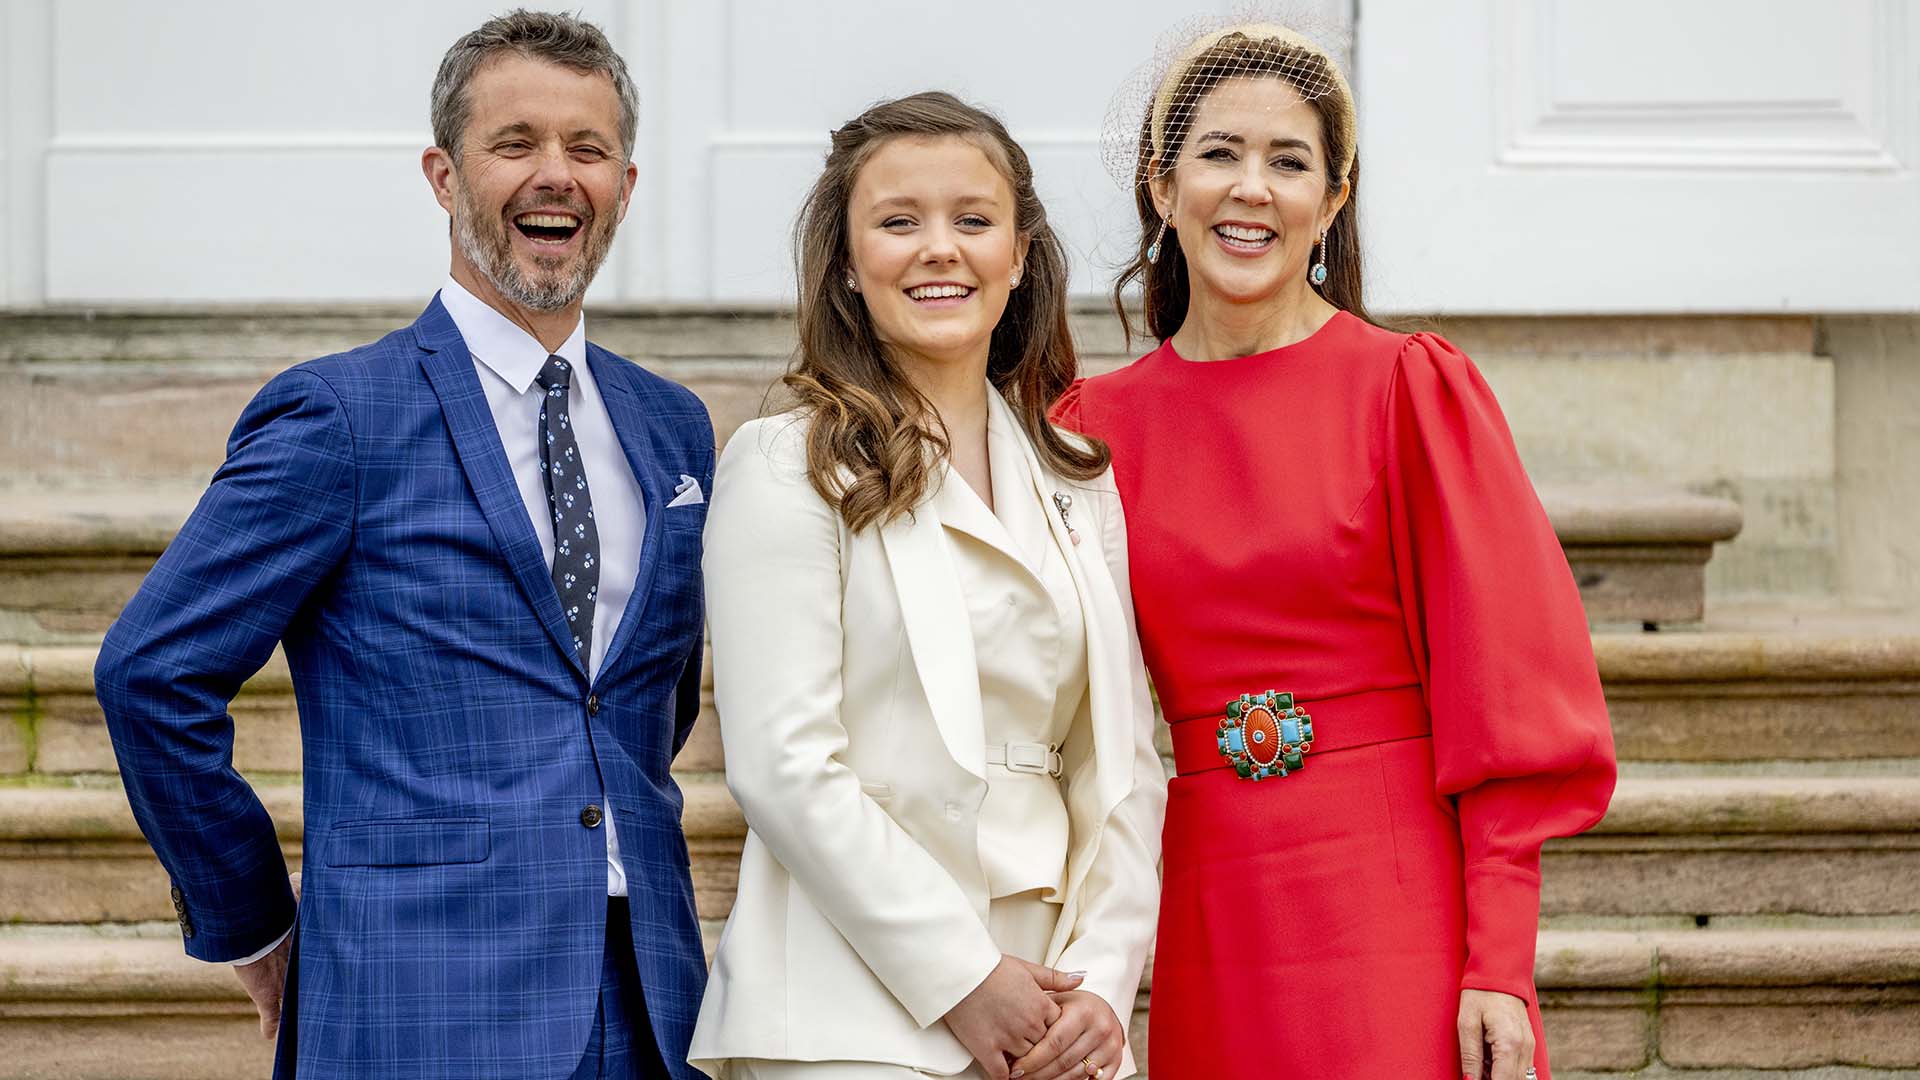 DANMARK - Crown Prince Frederik, Princess Josephine, Princess Isabella, Queen Margrethe, Crown Princess Mary, Prince Christian and Prince Vincent pose for a family photo Princess Isabella's confirmation in Fredensborg Castle Church in Fredensborg, on April 30, 2022.  Robin Utrecht